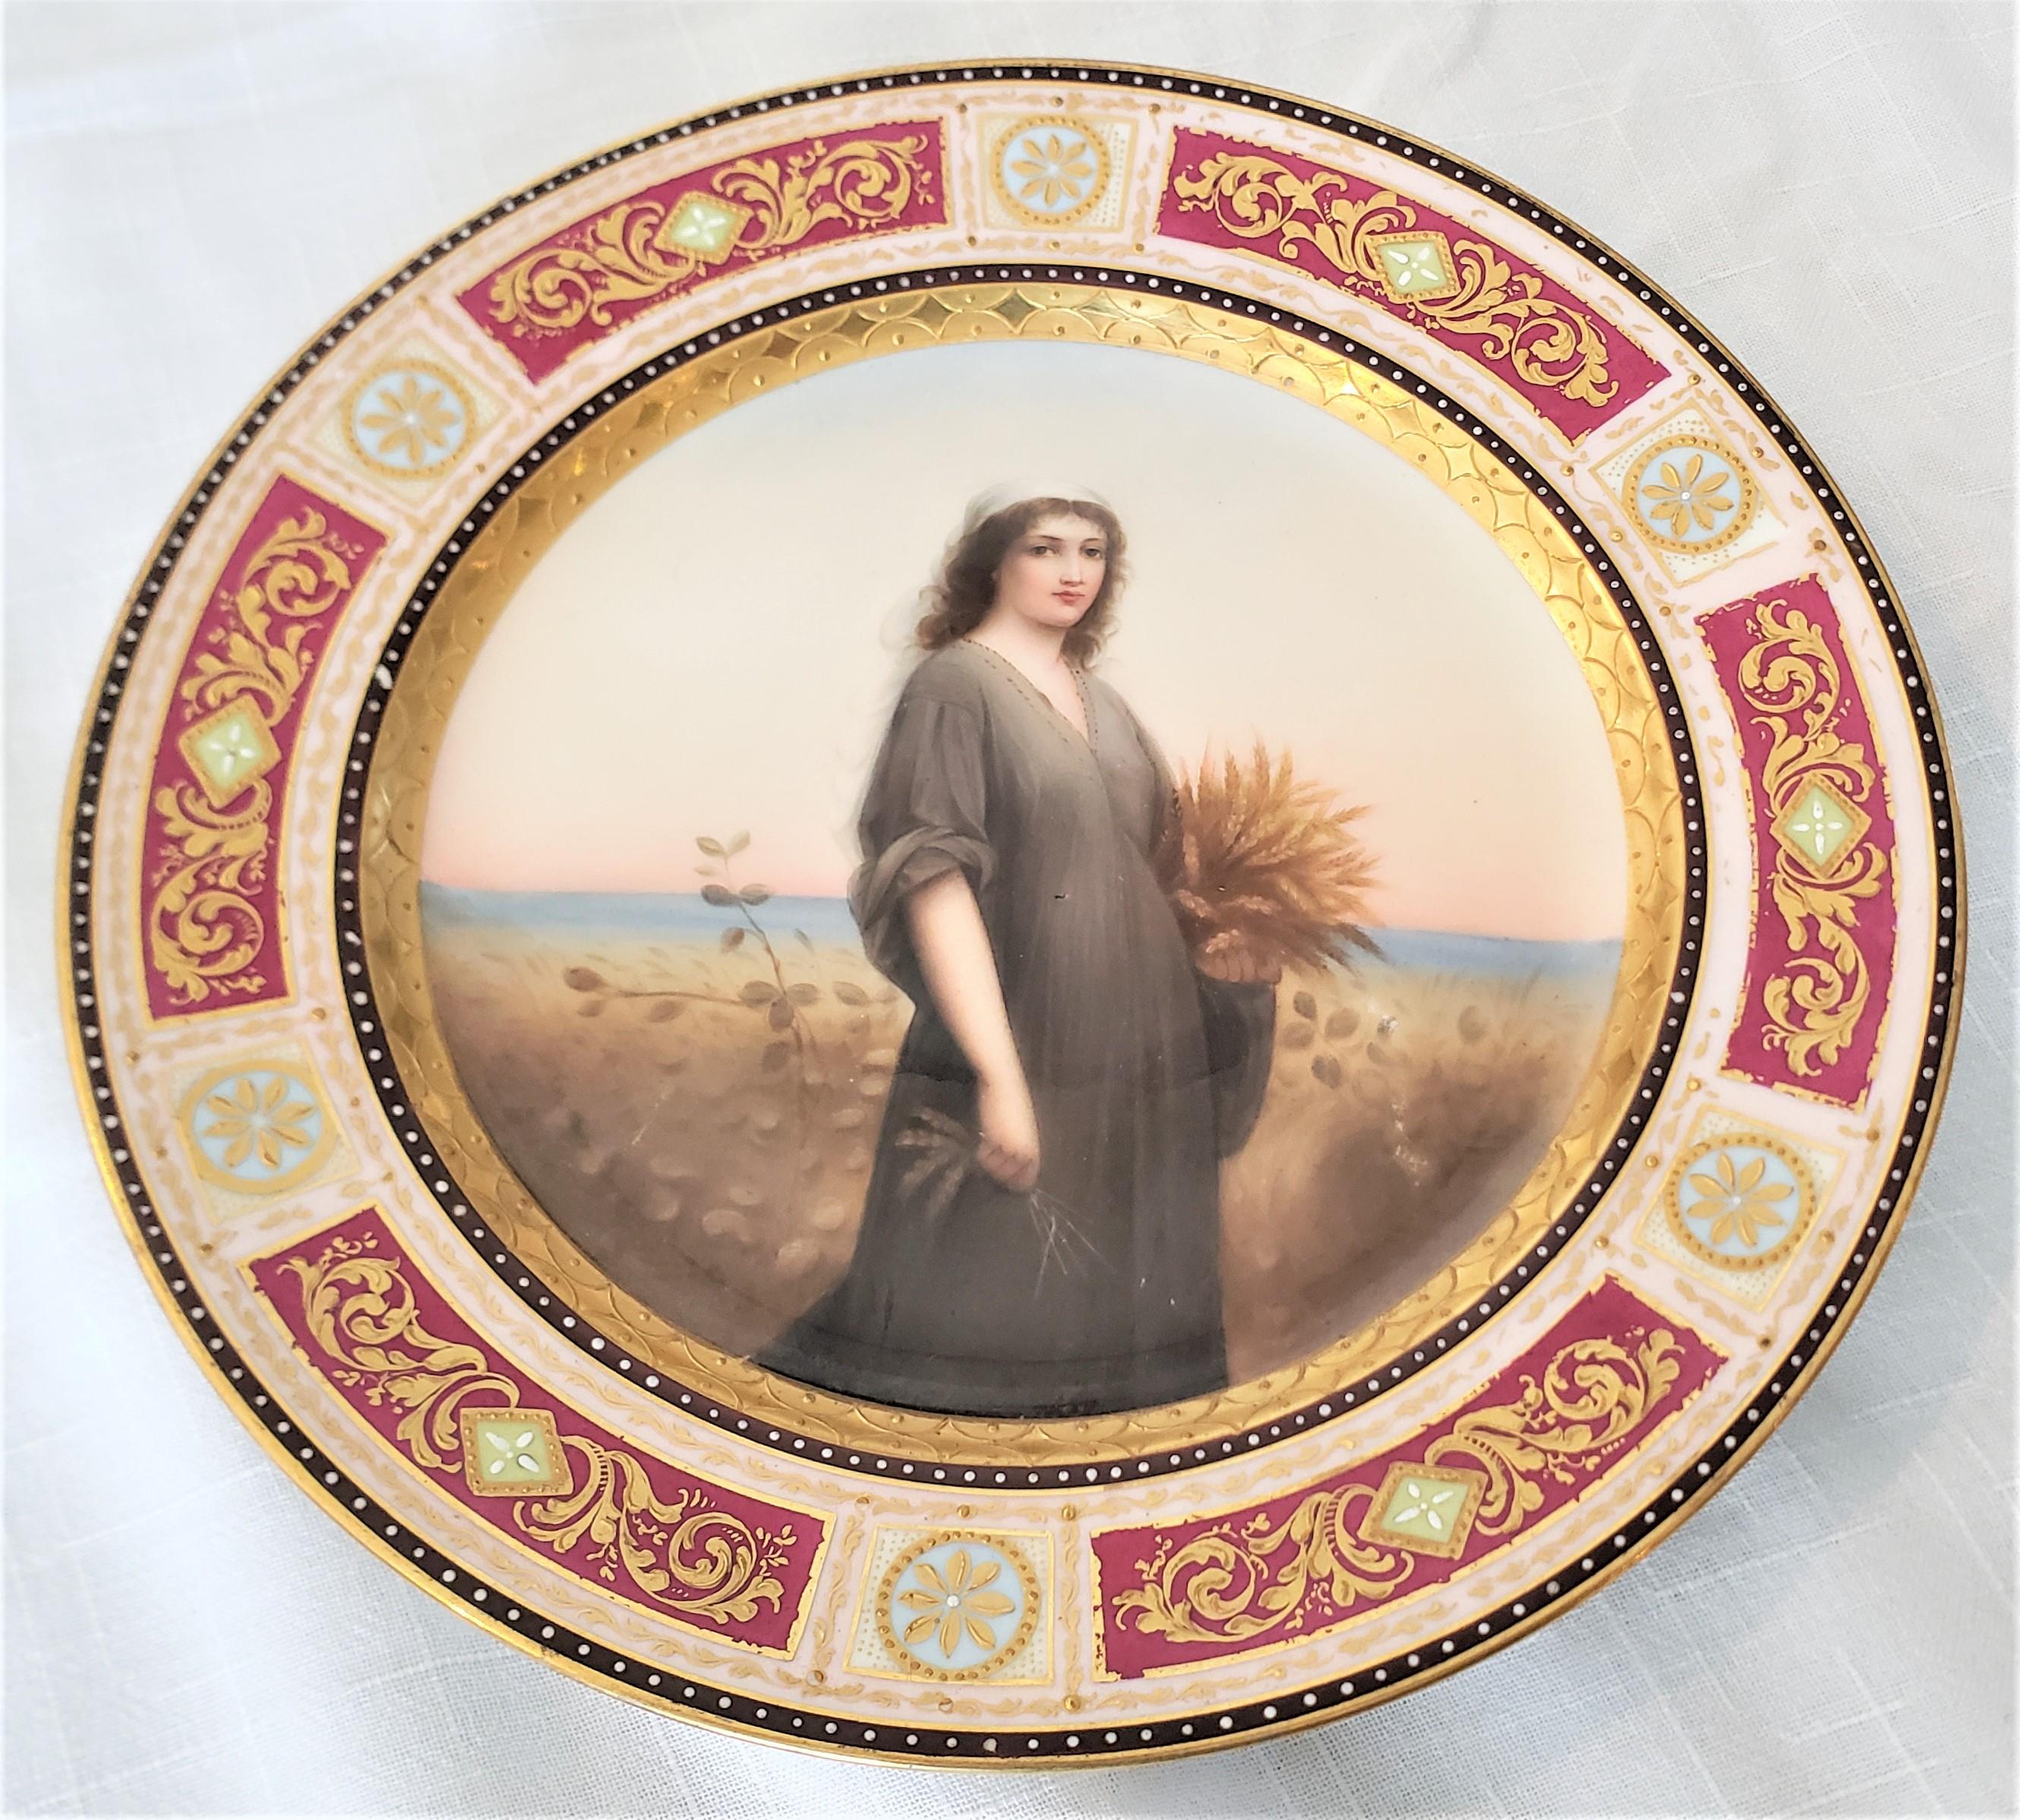 This antique hand-painted porcelain cabinet plate was made by the renowned KPM porcelain factory of Germany in approximately 1880. The center of the plate features a depiction of the Biblical 